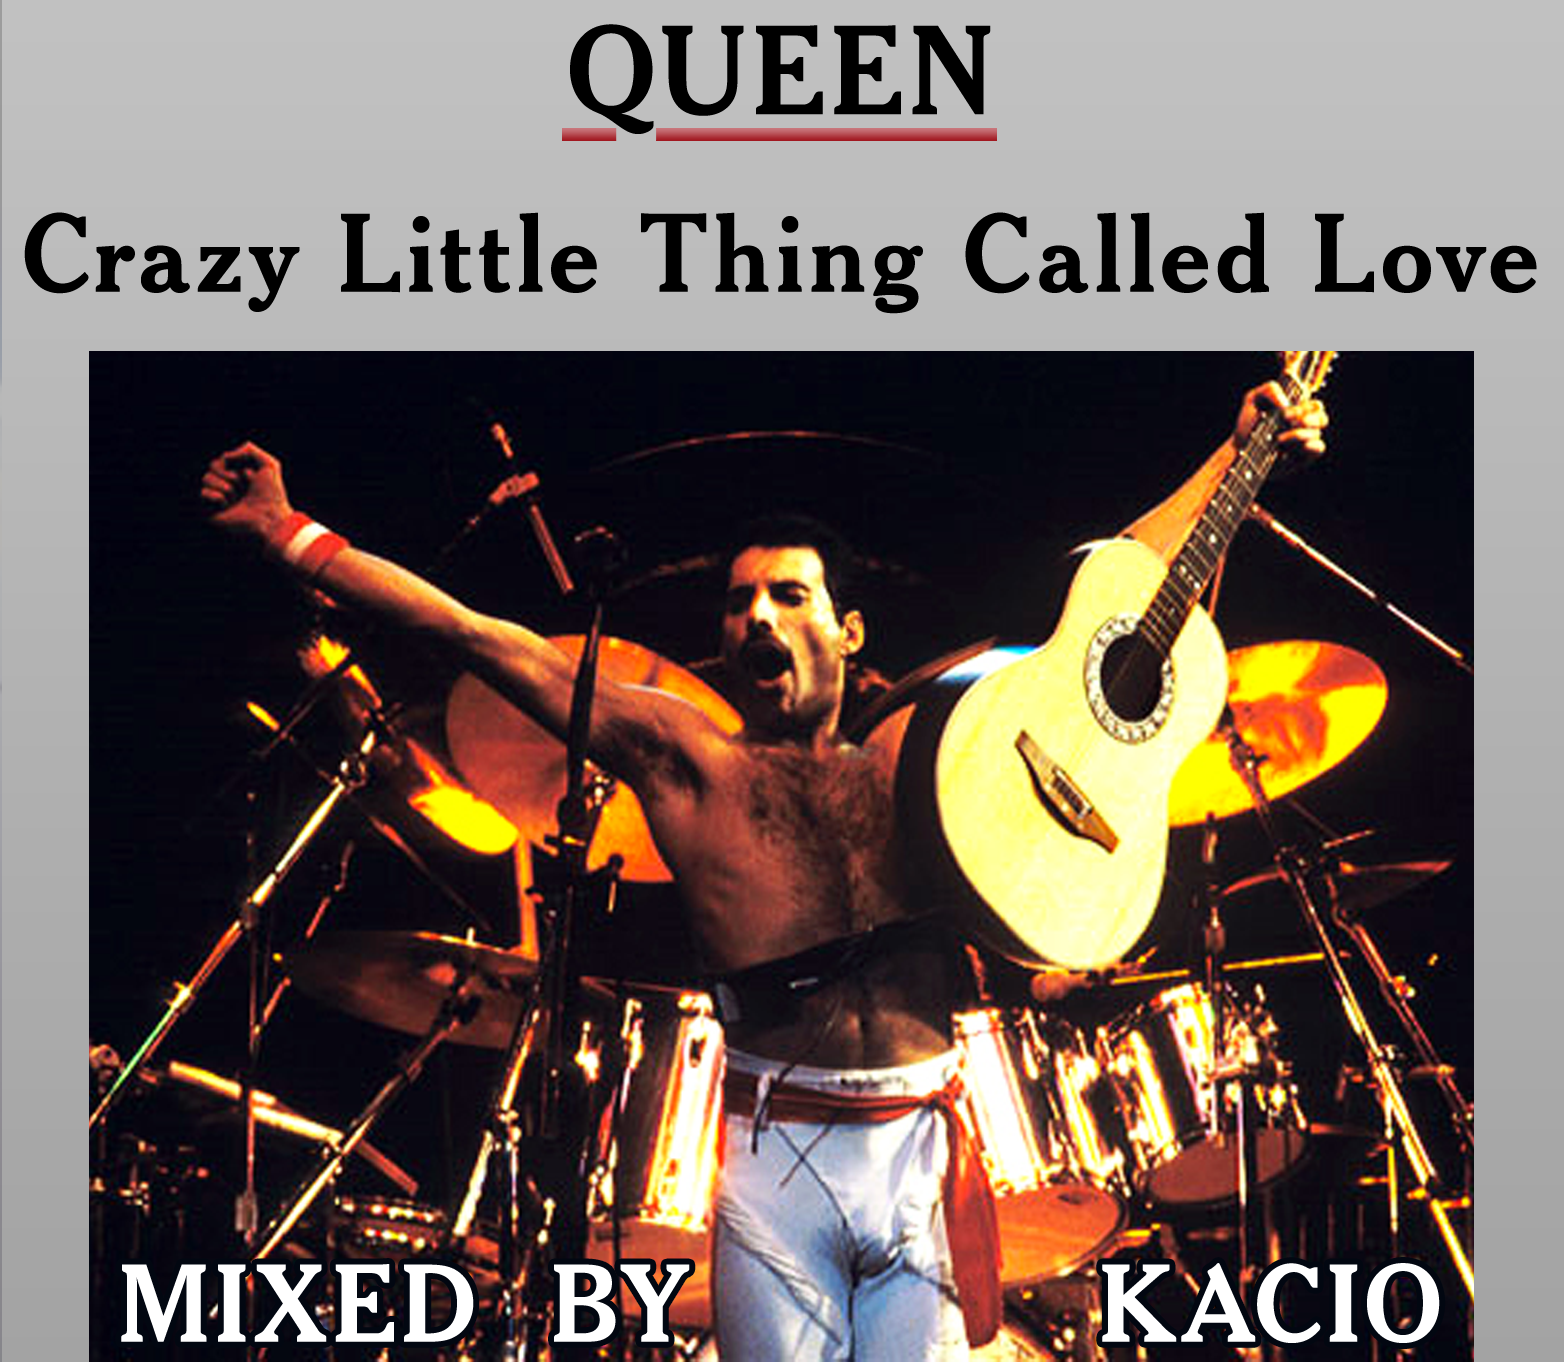 Queen thing called love. Фредди Меркьюр Crazy little THINGCALLED Love. Crazy little thing Called Love Queen. Queen «Crazy little thing Called Love» (1985). Freddie Mercury Crazy little thing Called Love.